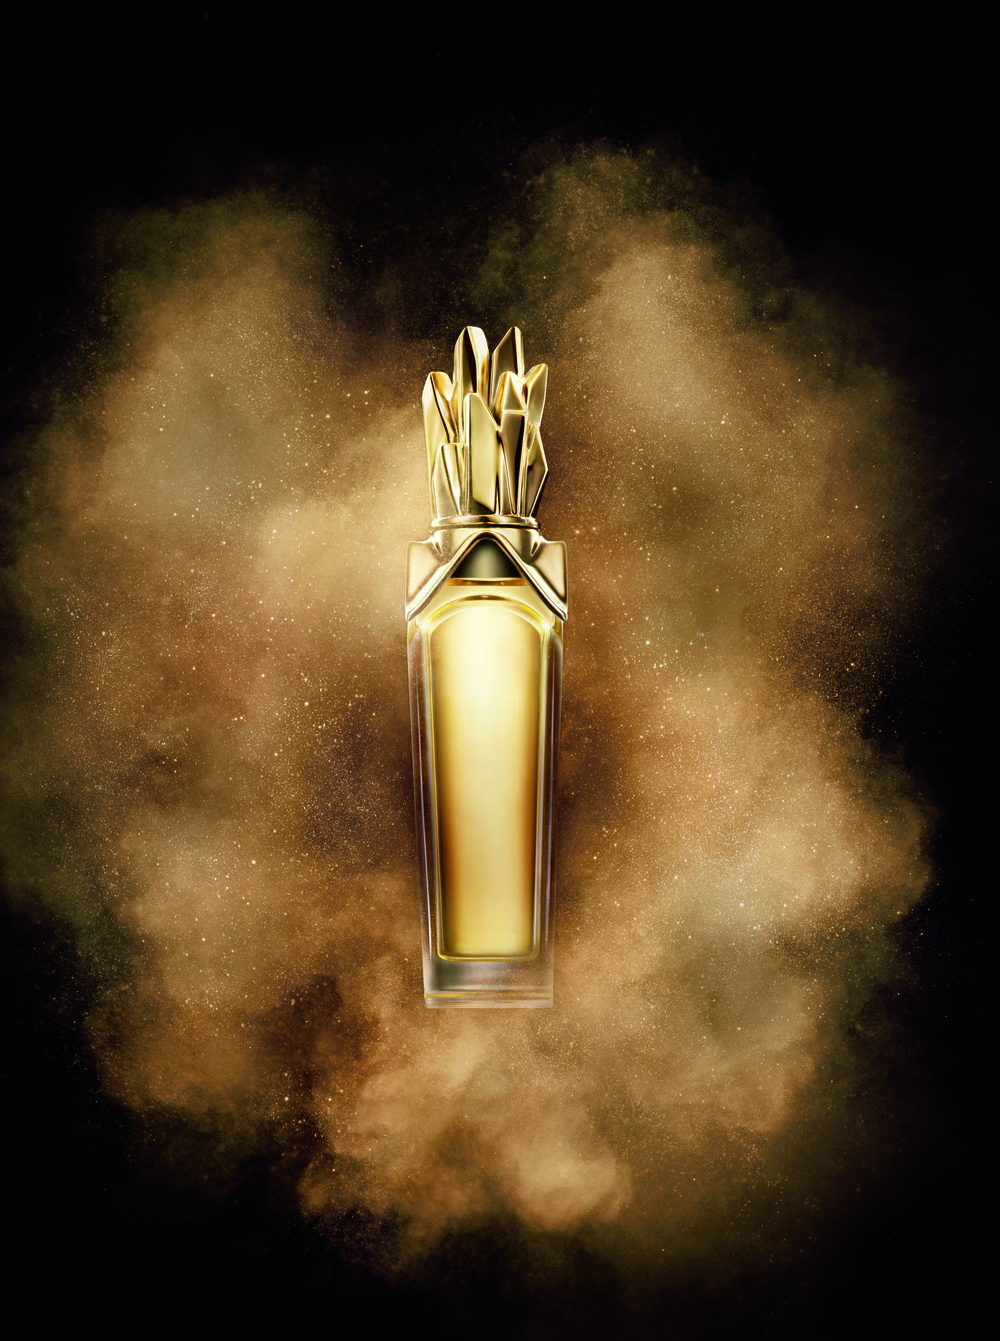  Brand Name -Coty
Brand Category/Product Name – Beyonce RISE fragrance
Photo Shoot Date: 5/29/13
Photographer Name: Mario Godlewski
Model(s) Name(s): N/A
Usage: 5 years worldwide, all media 